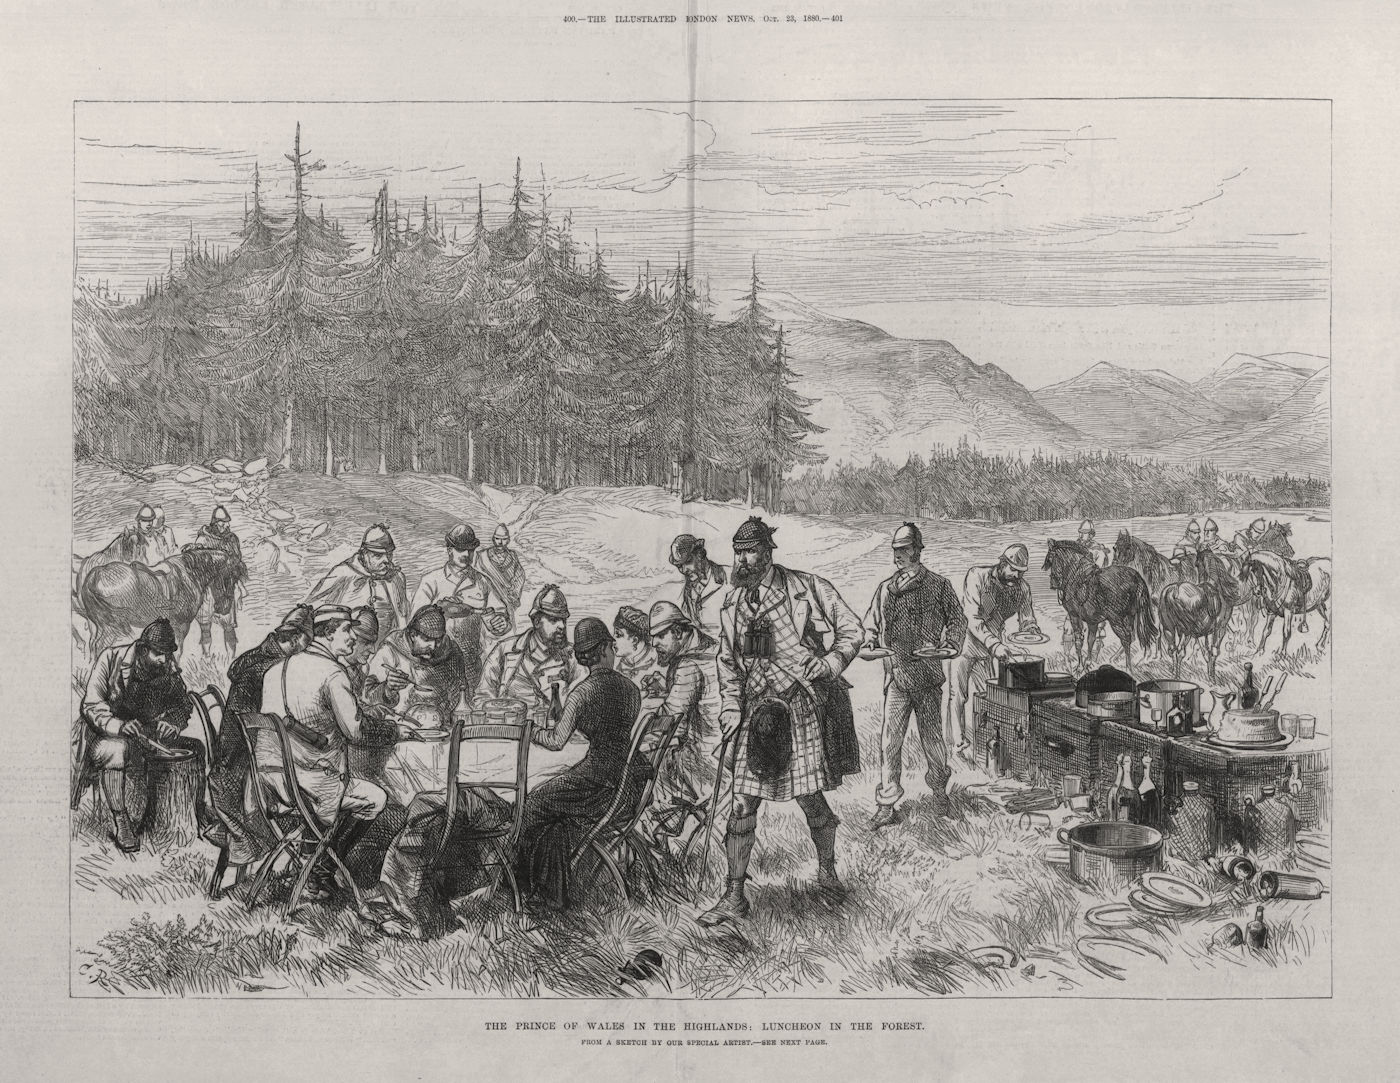 Prince of Wales (later Edward VII) in the Highlands: lunch in the forest 1880